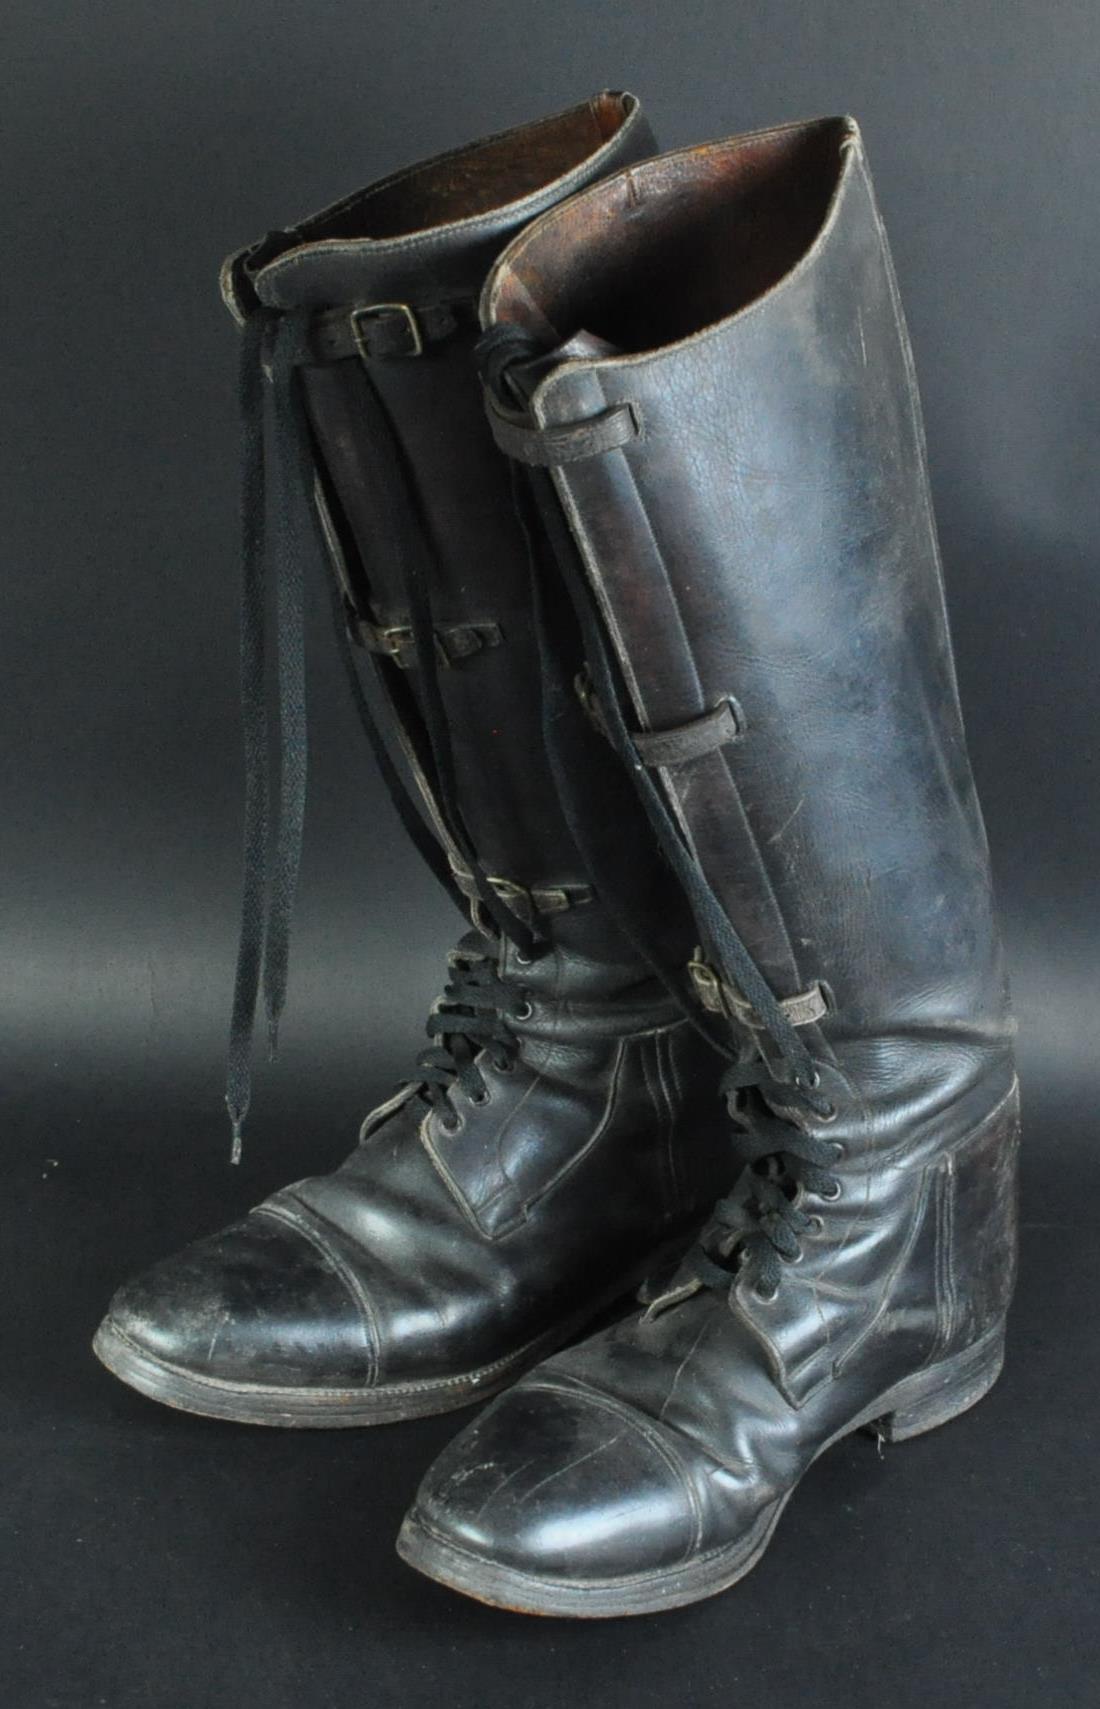 WWI FIRST WORLD WAR INTEREST - ROYAL FLYING CORPS BOOTS - Image 2 of 6